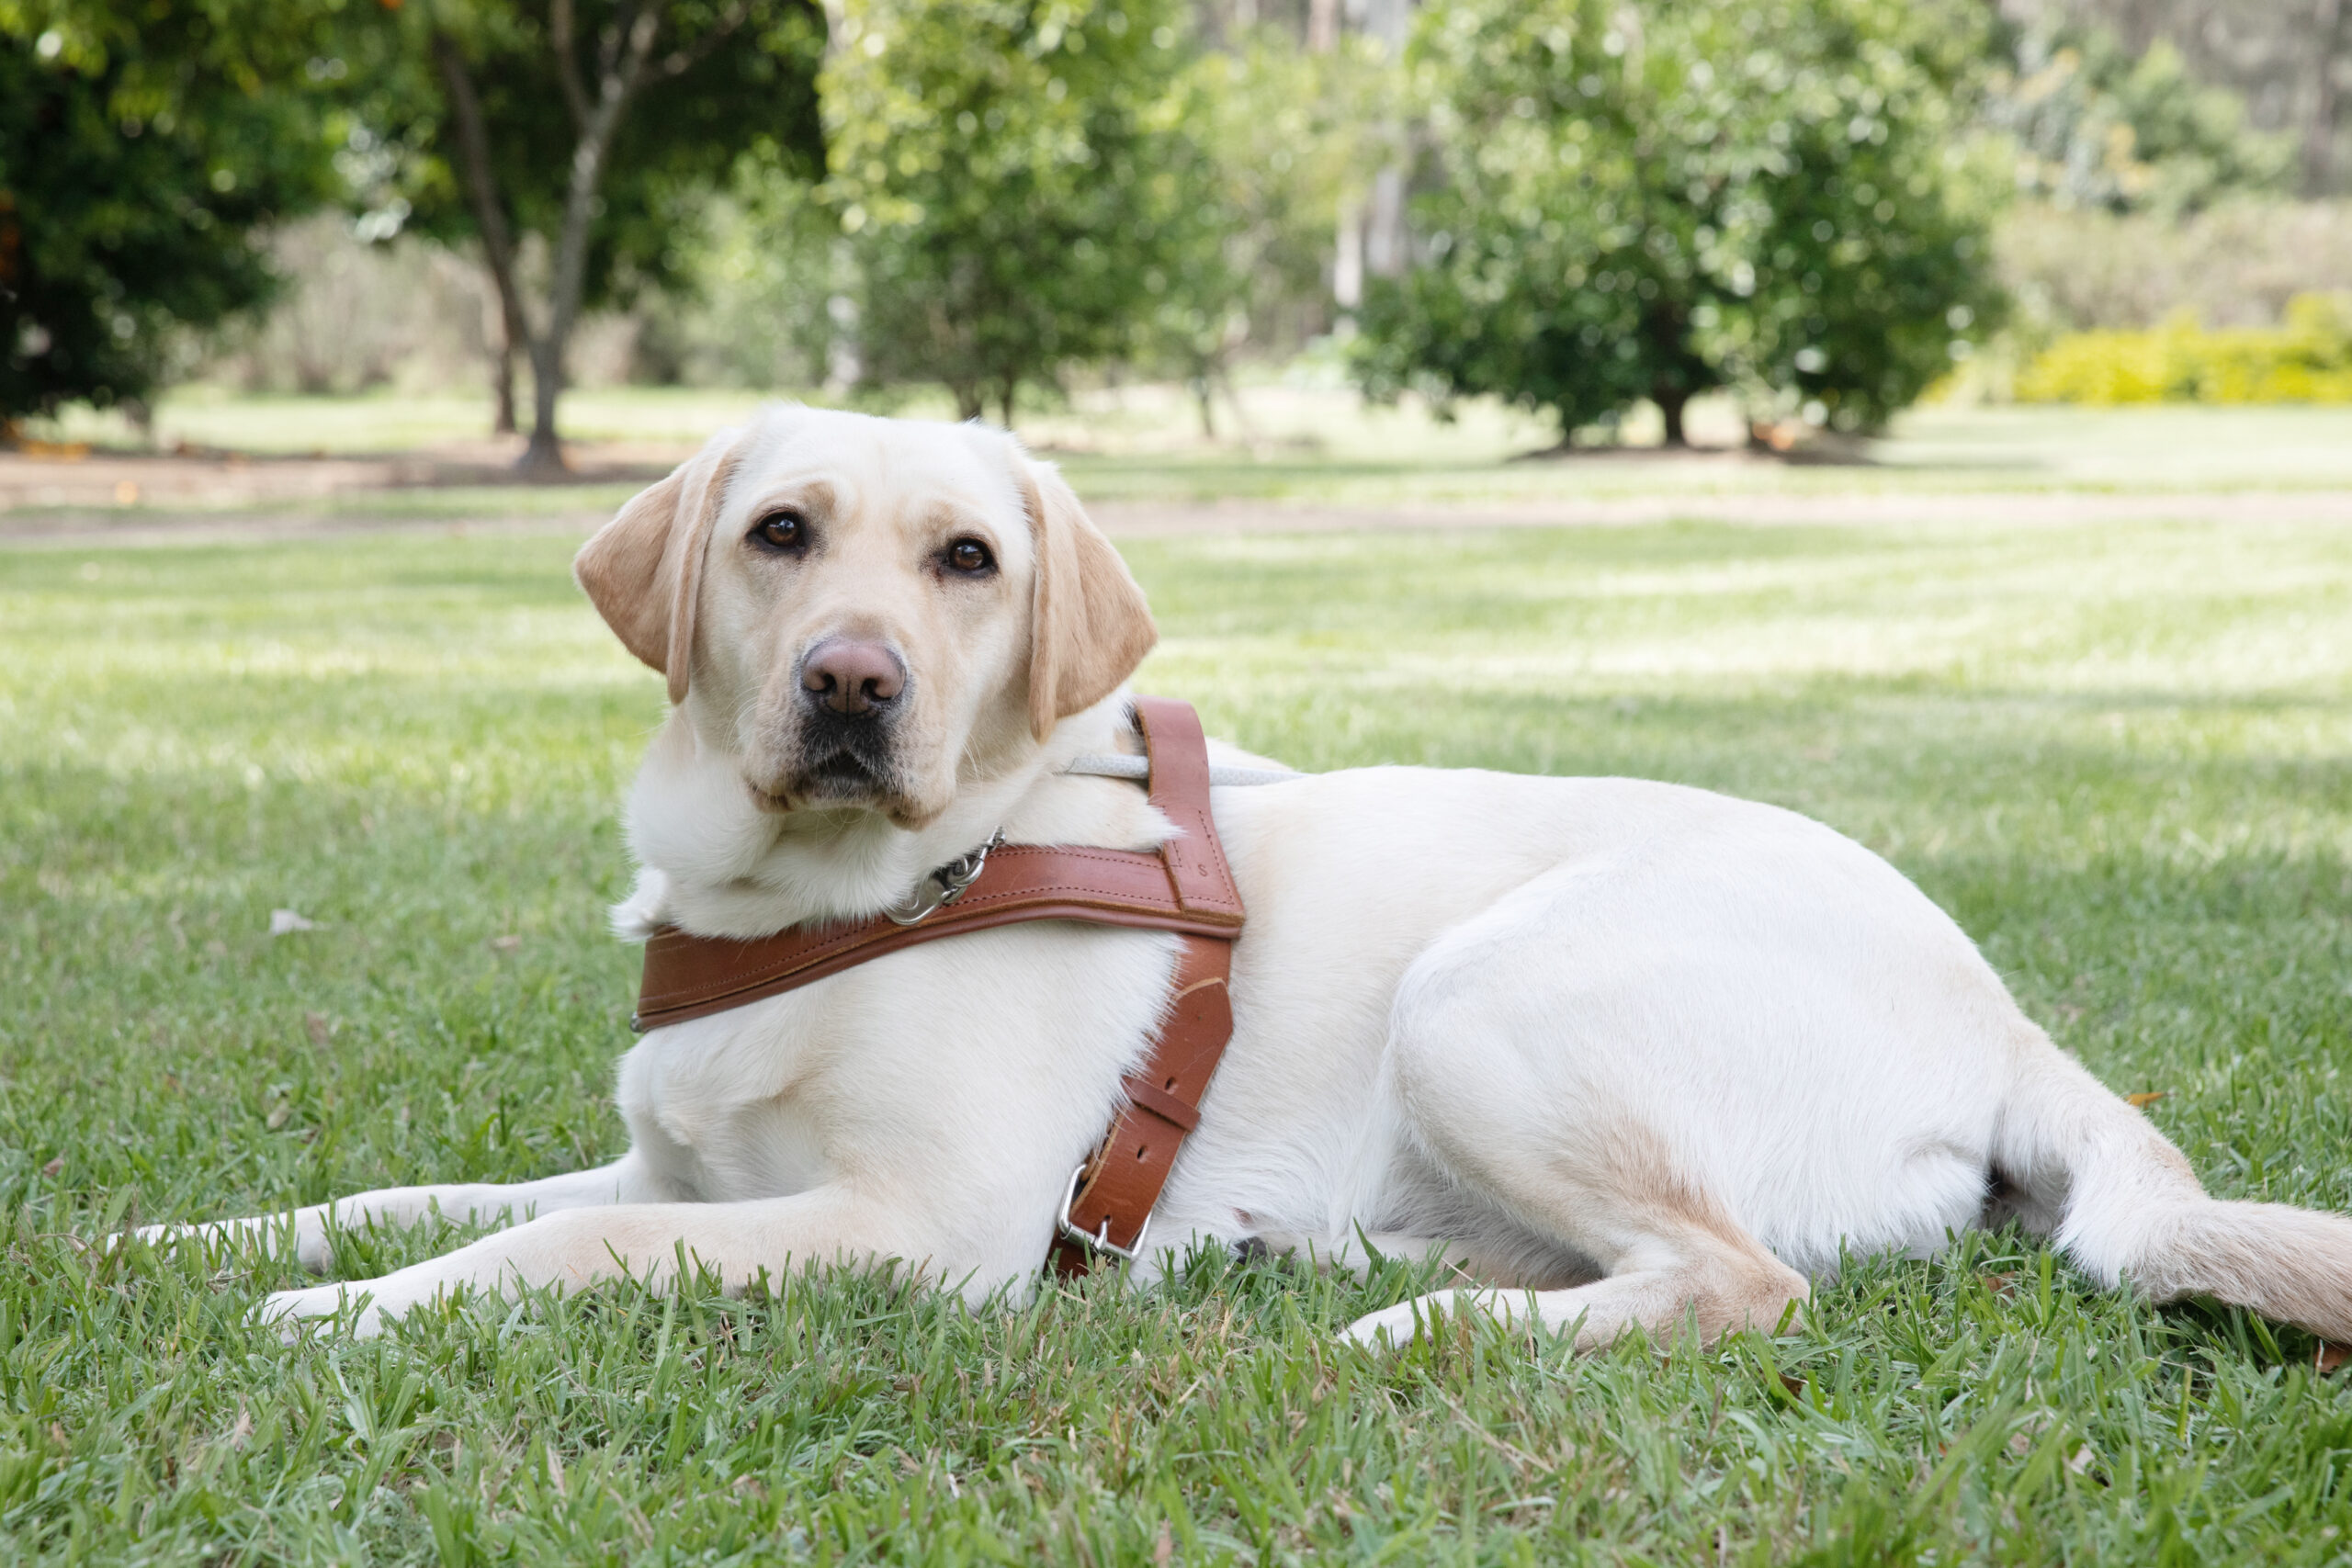 A yellow Guide Dog in harness stretched out on the grass.